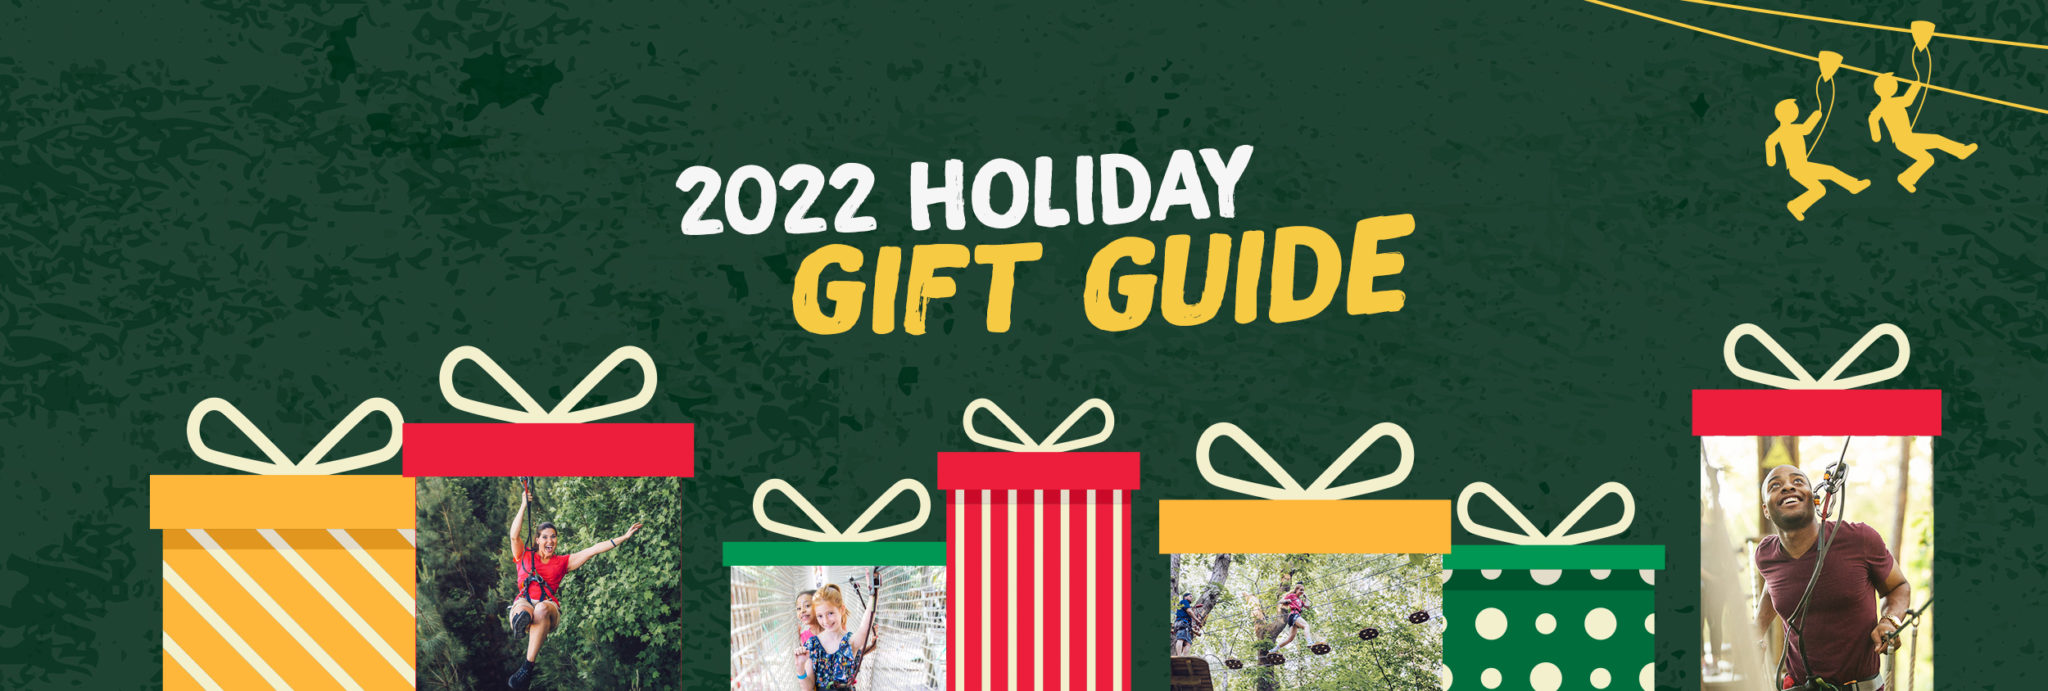 Holiday Gifts at Go Ape